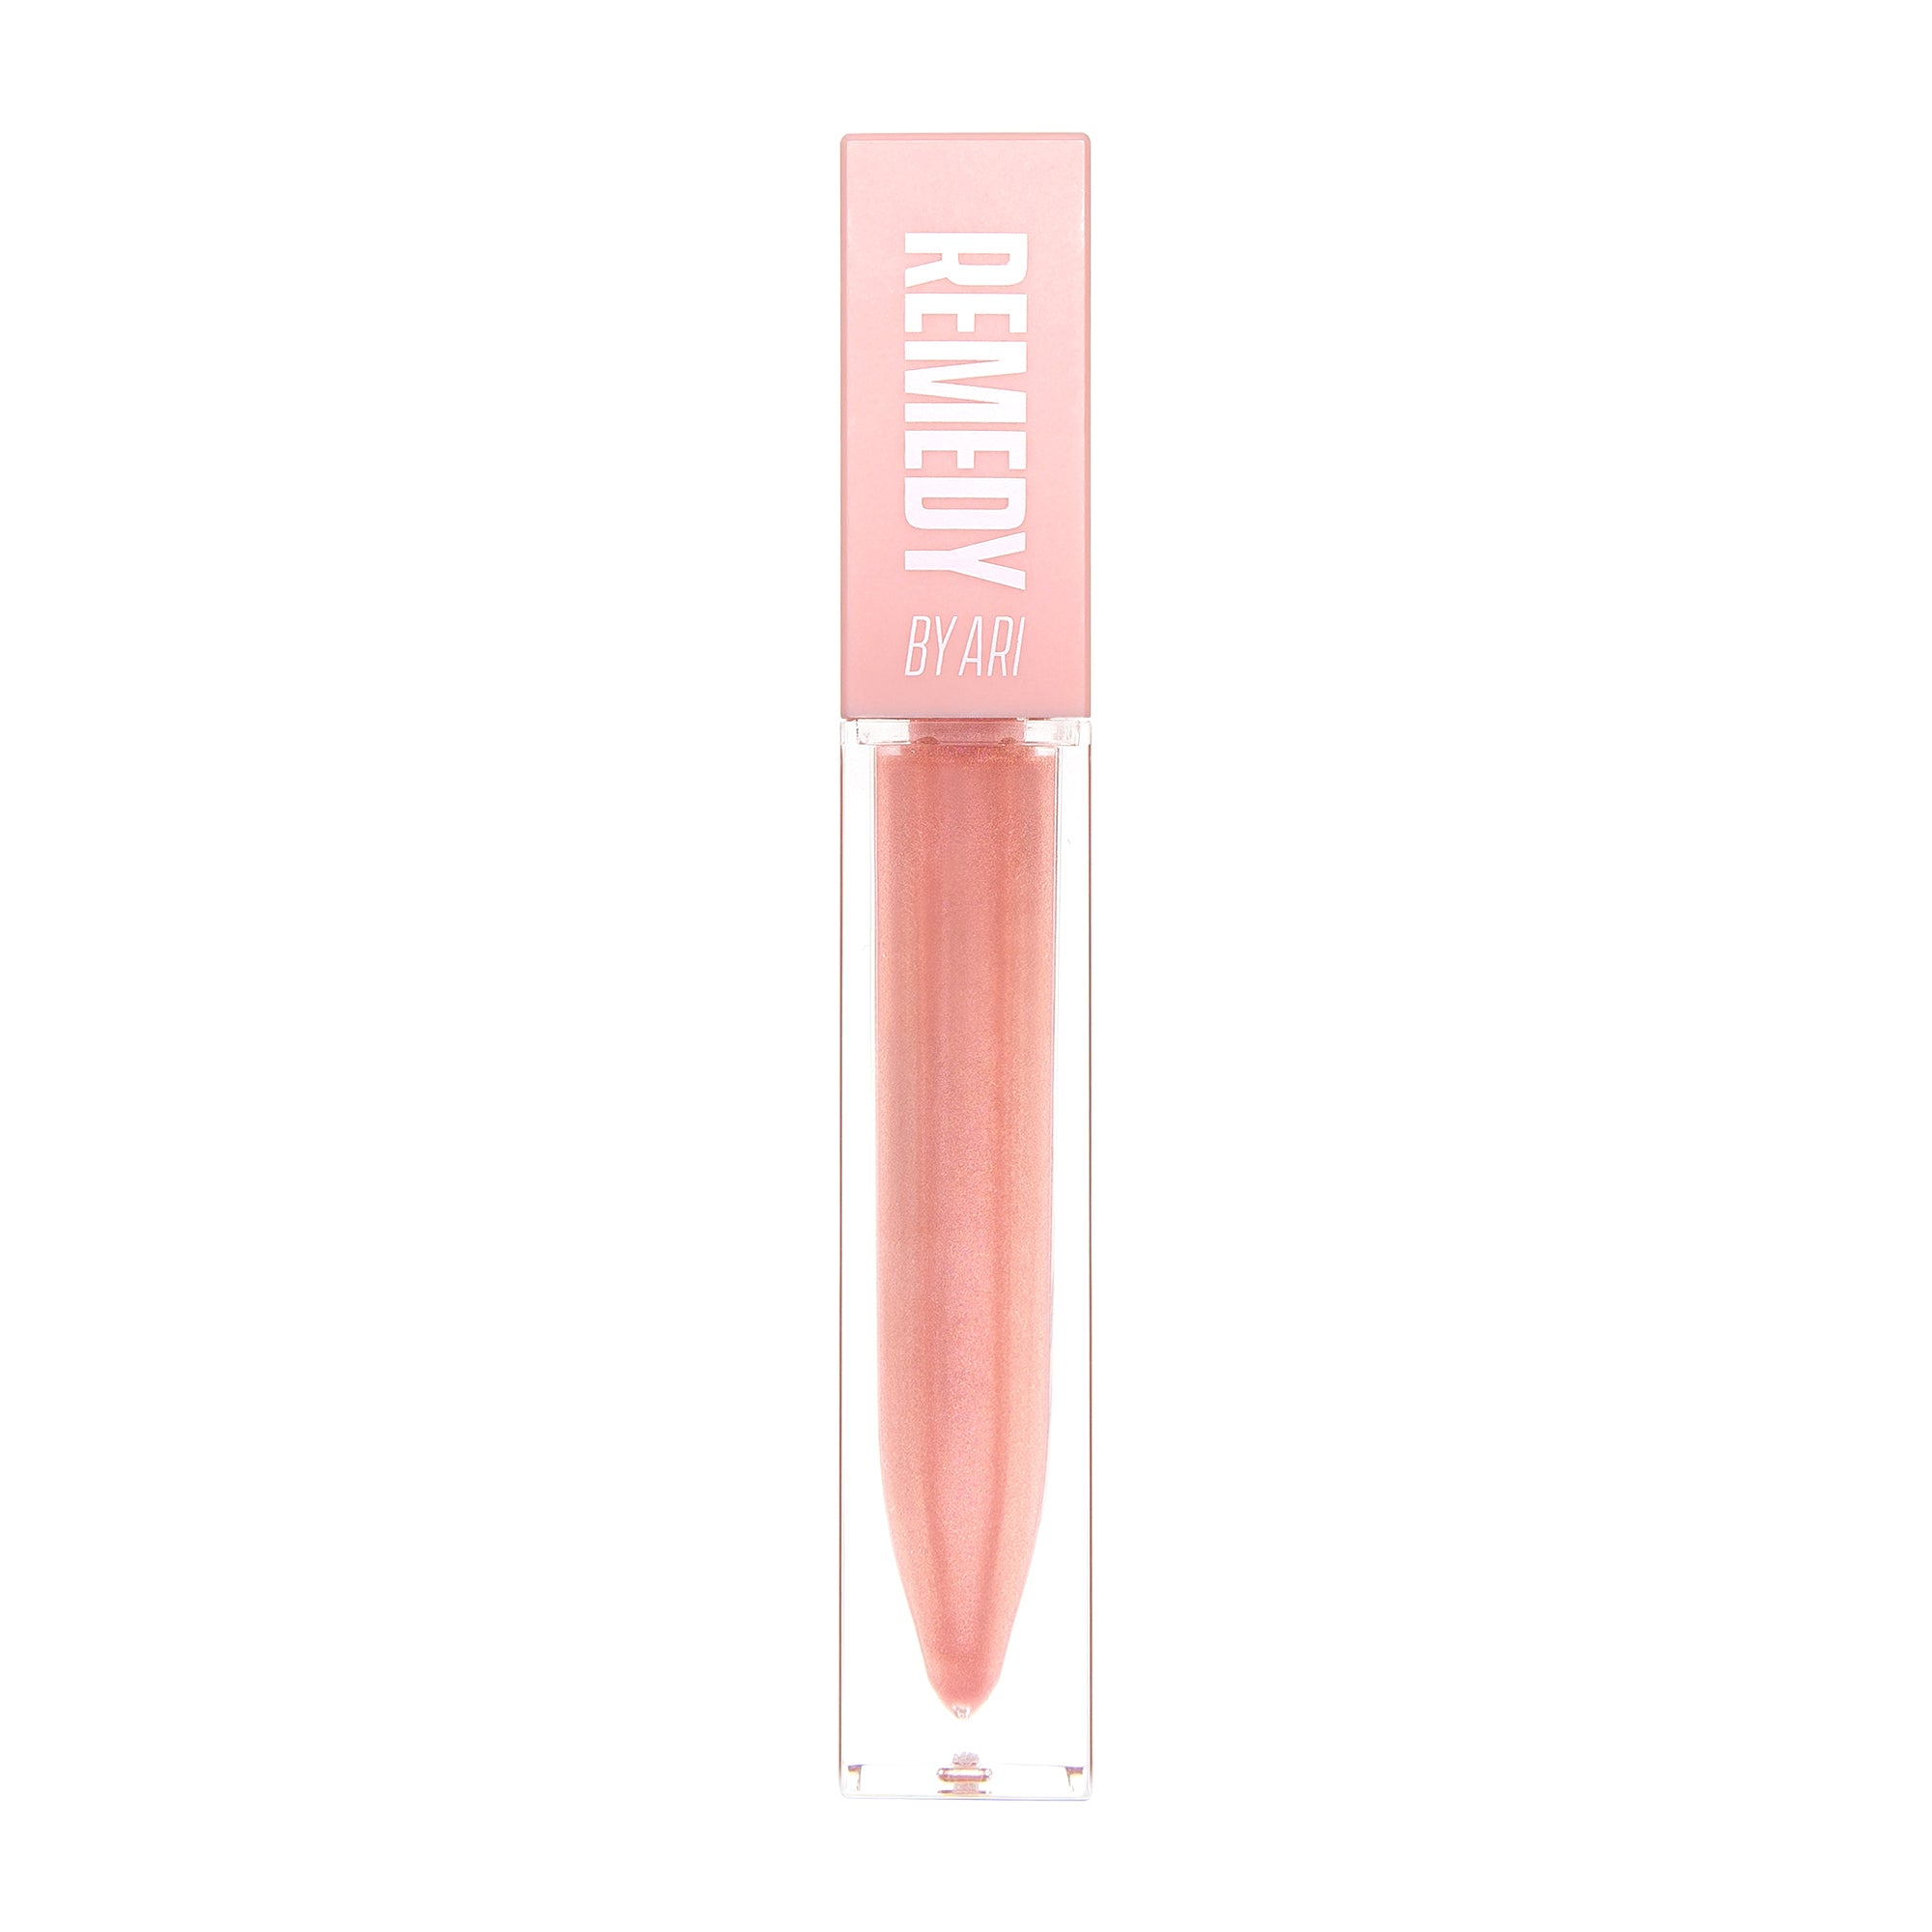 Conceited Super Gloss – Remedy By Ari